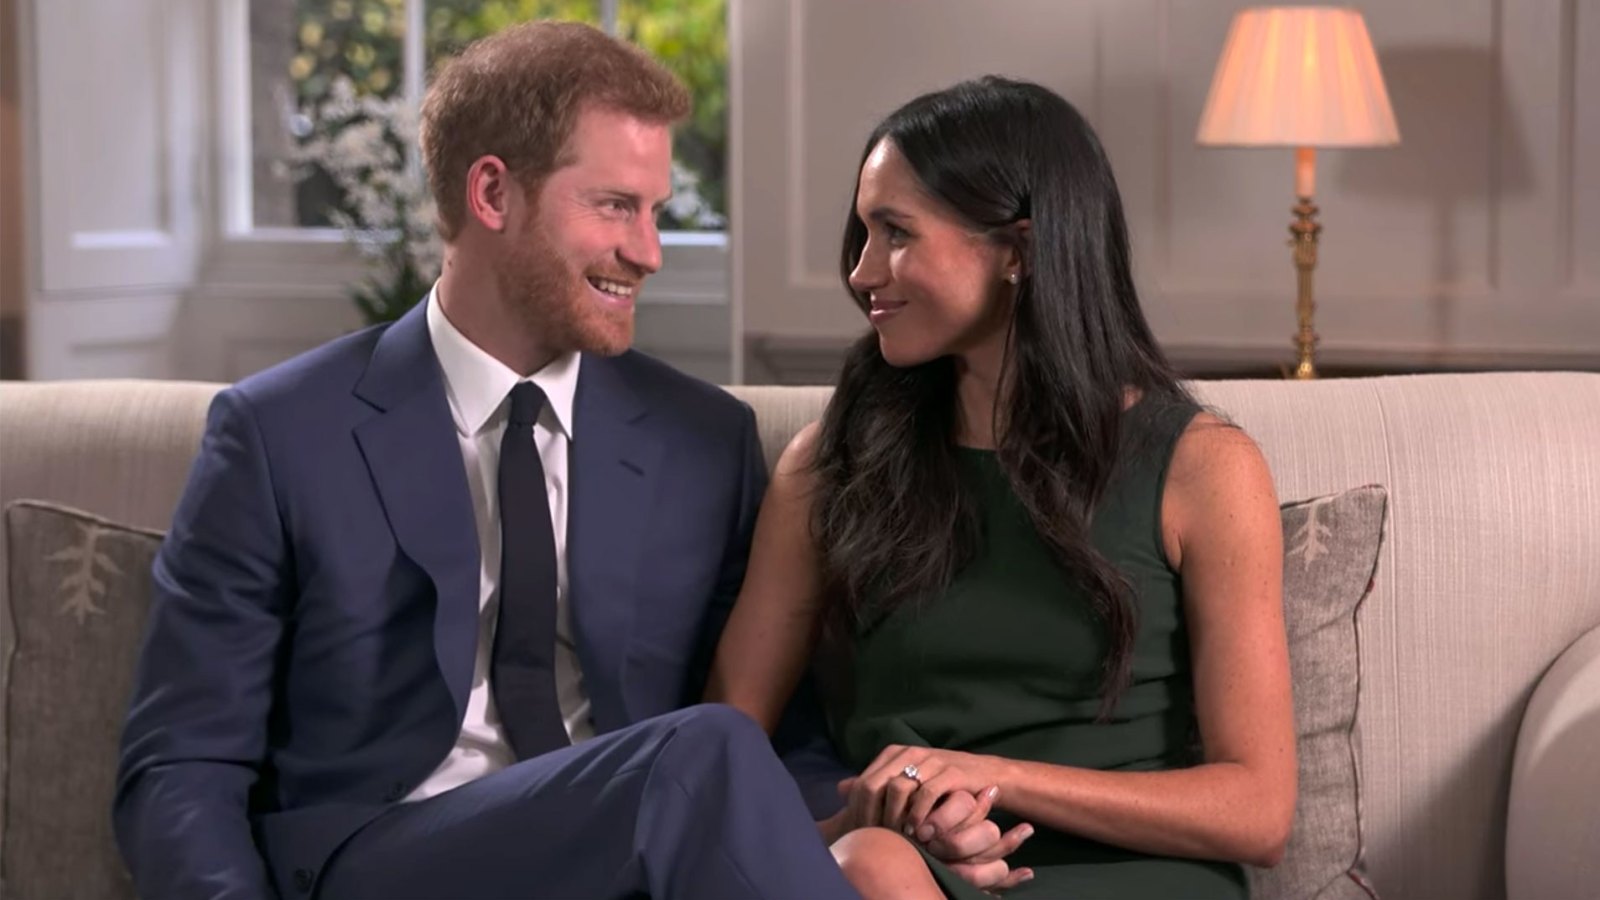 Meghan Markle Compares Prince Harry Engagement Interview to An Orchestrated Reality Show